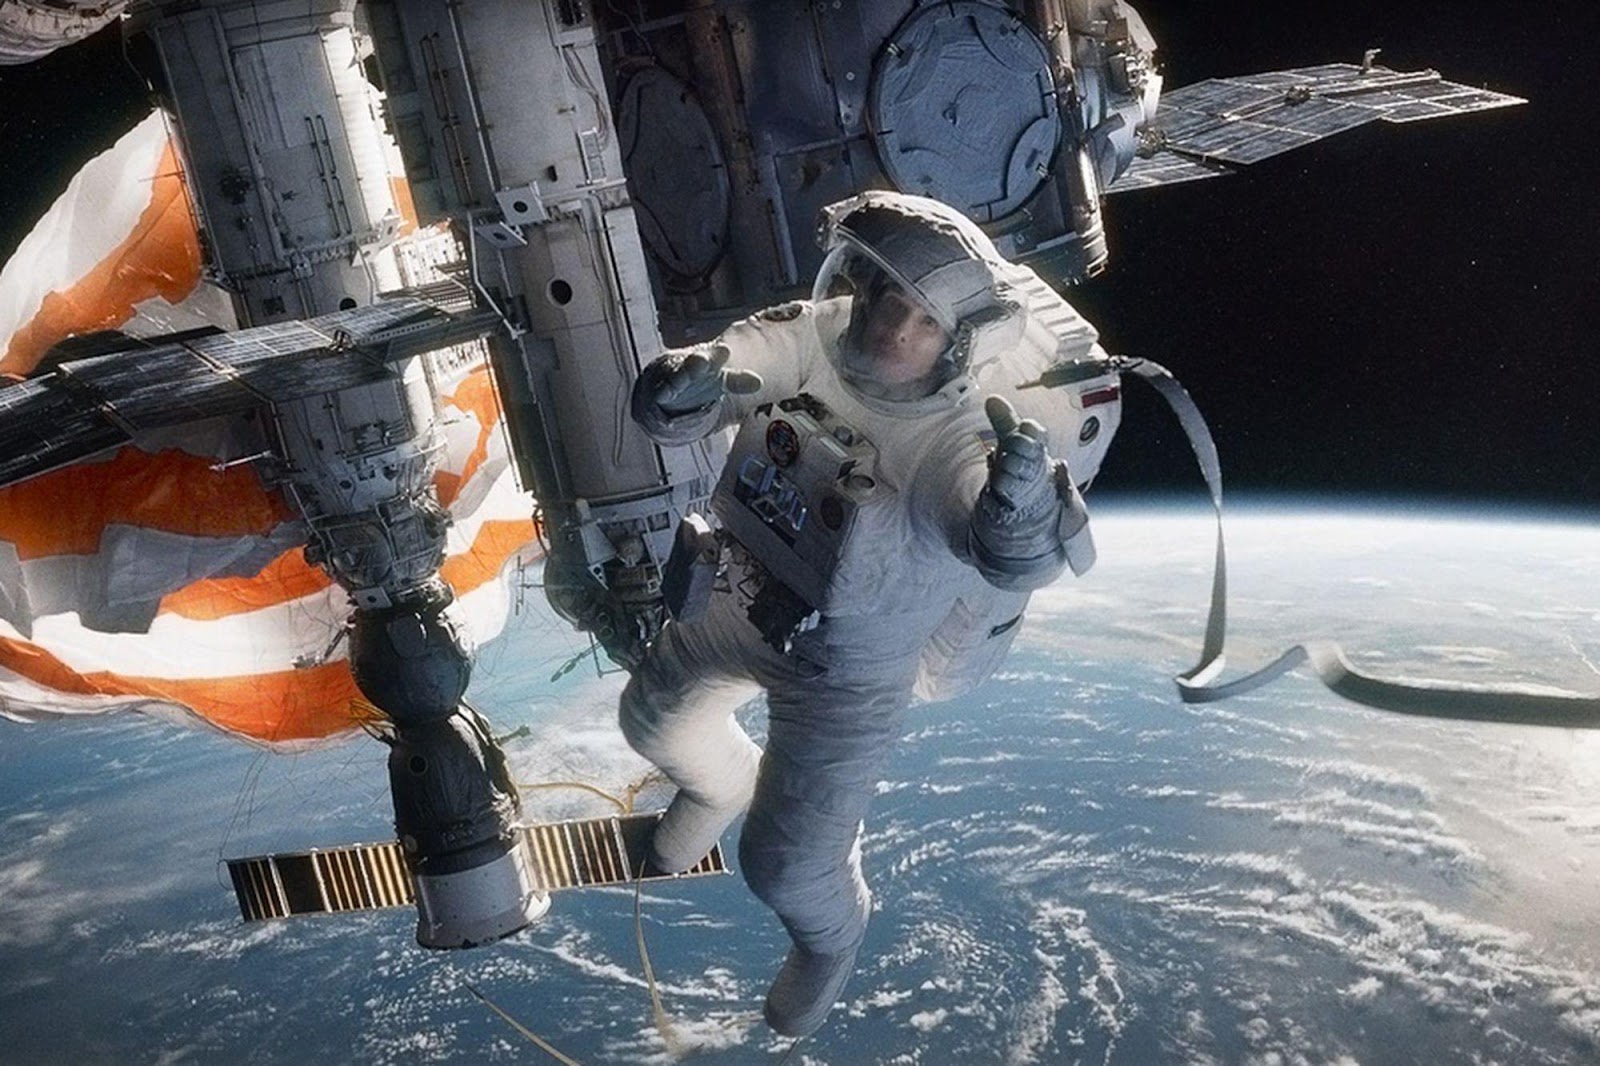 Here's how special effects masters made 'Gravity' look so real - The Verge